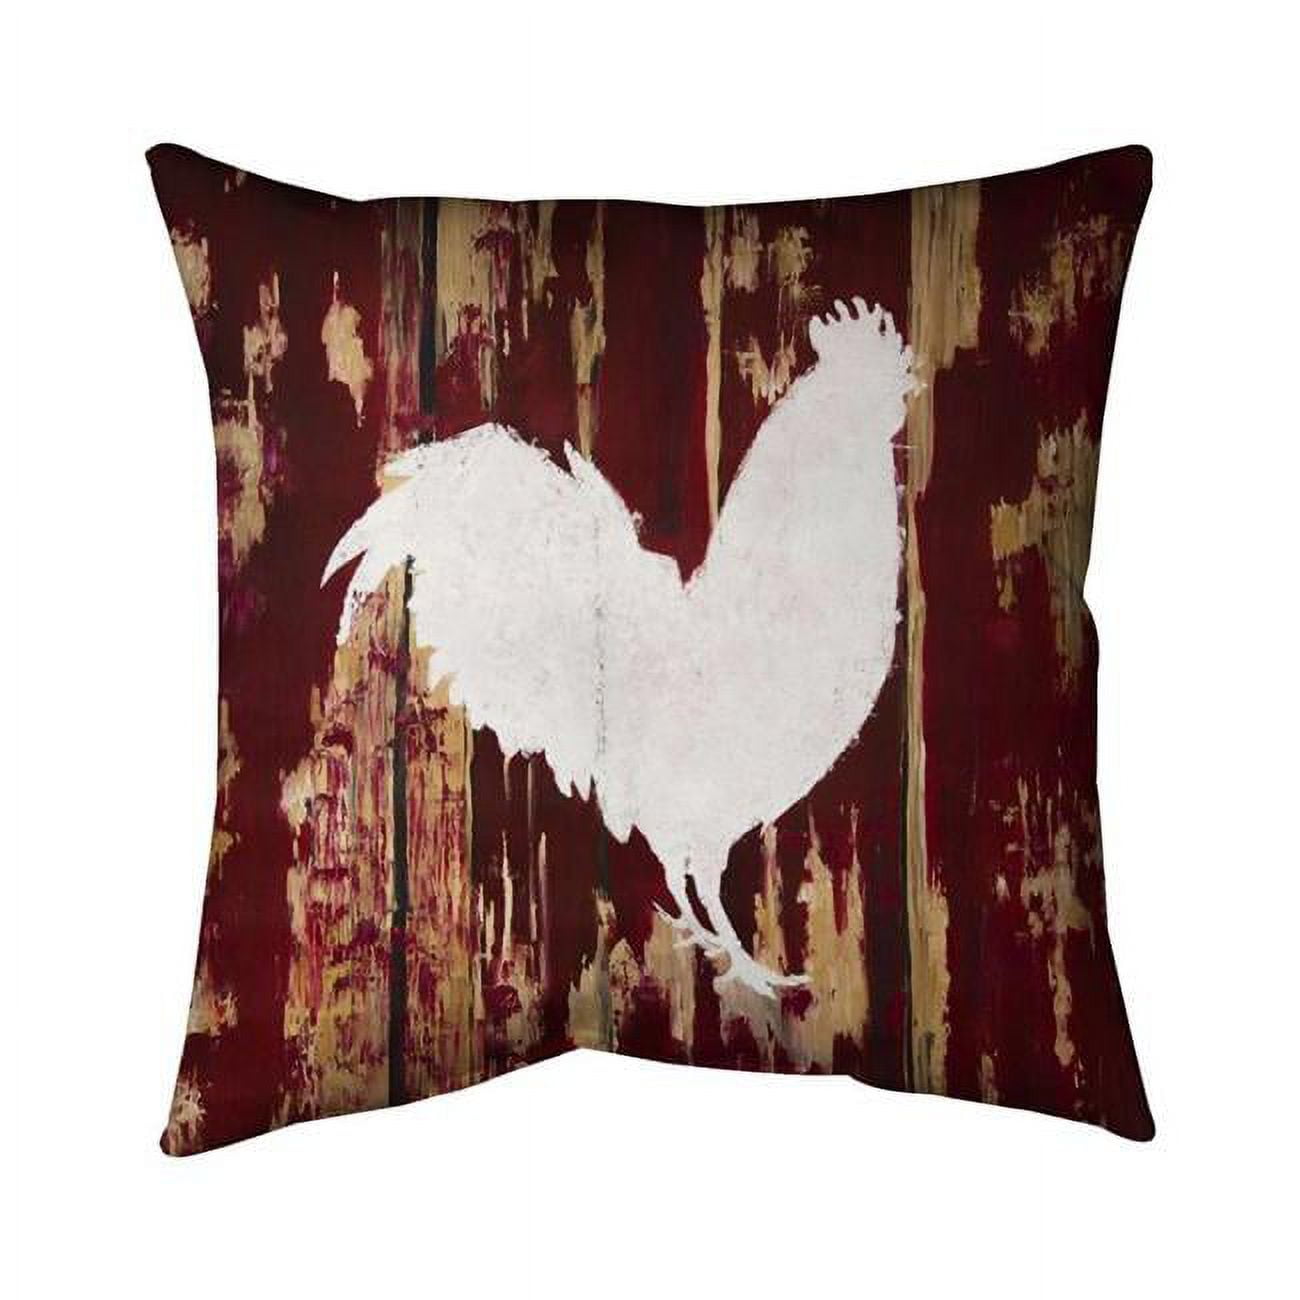 Begin Home Decor 5543-2020-AN507 20 x 20 in. Rooster Silhouette-Double Sided Print Indoor Pillow Cover